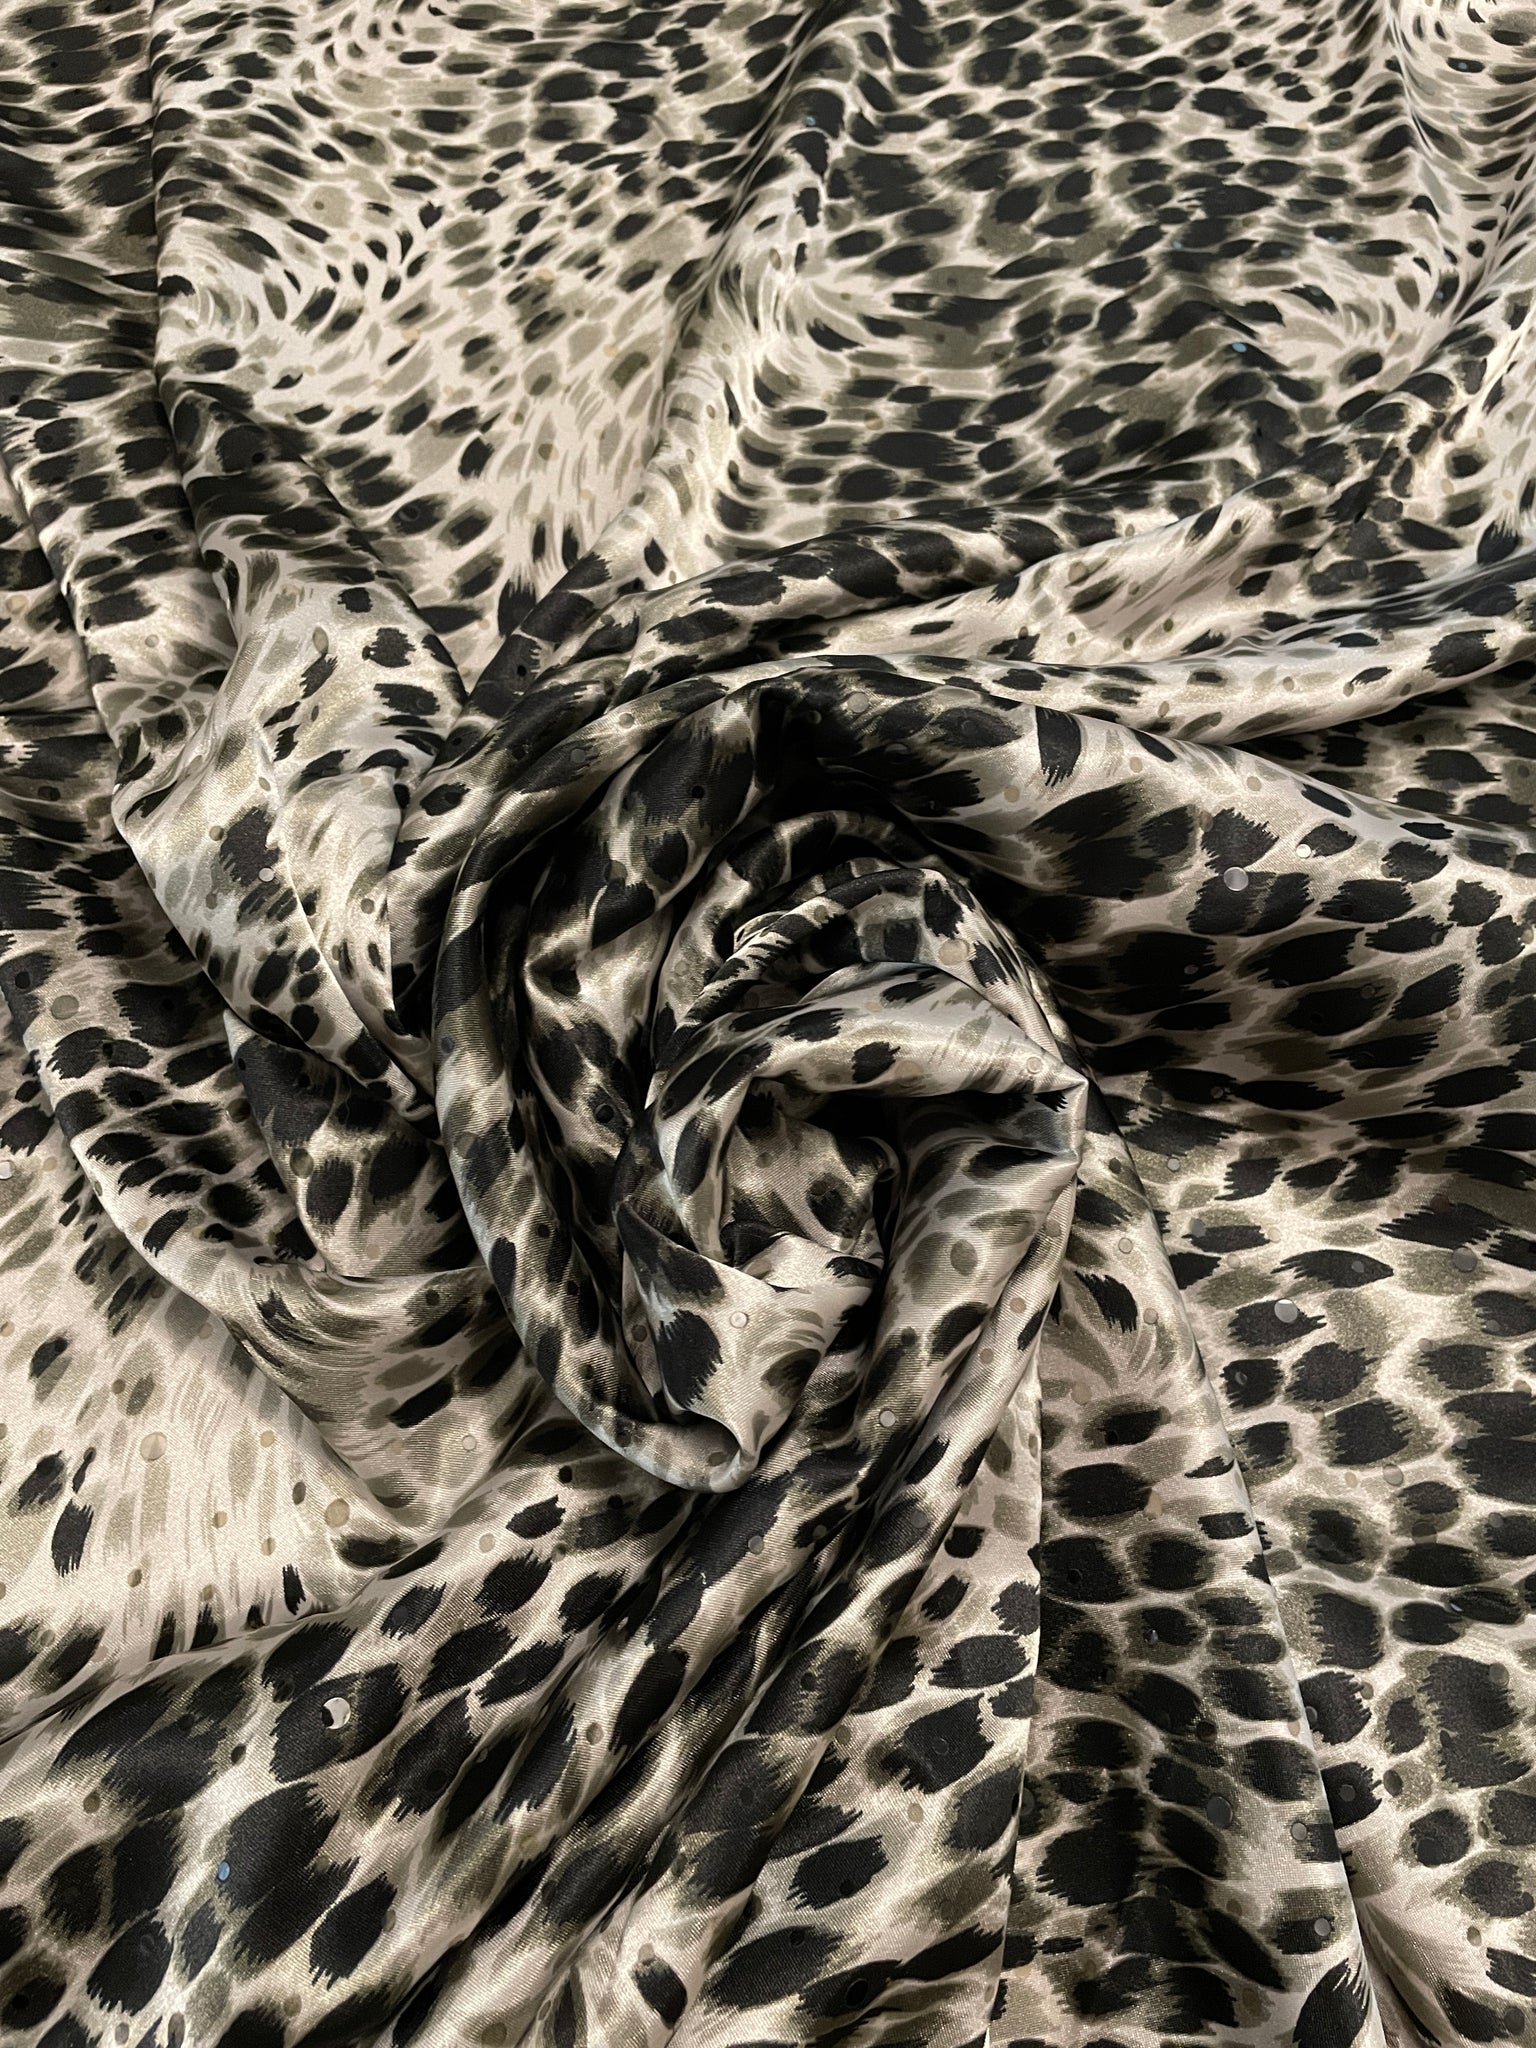 SALE 1 5/8 YD Polyester Charmeuse - Gray and Black Cheetah